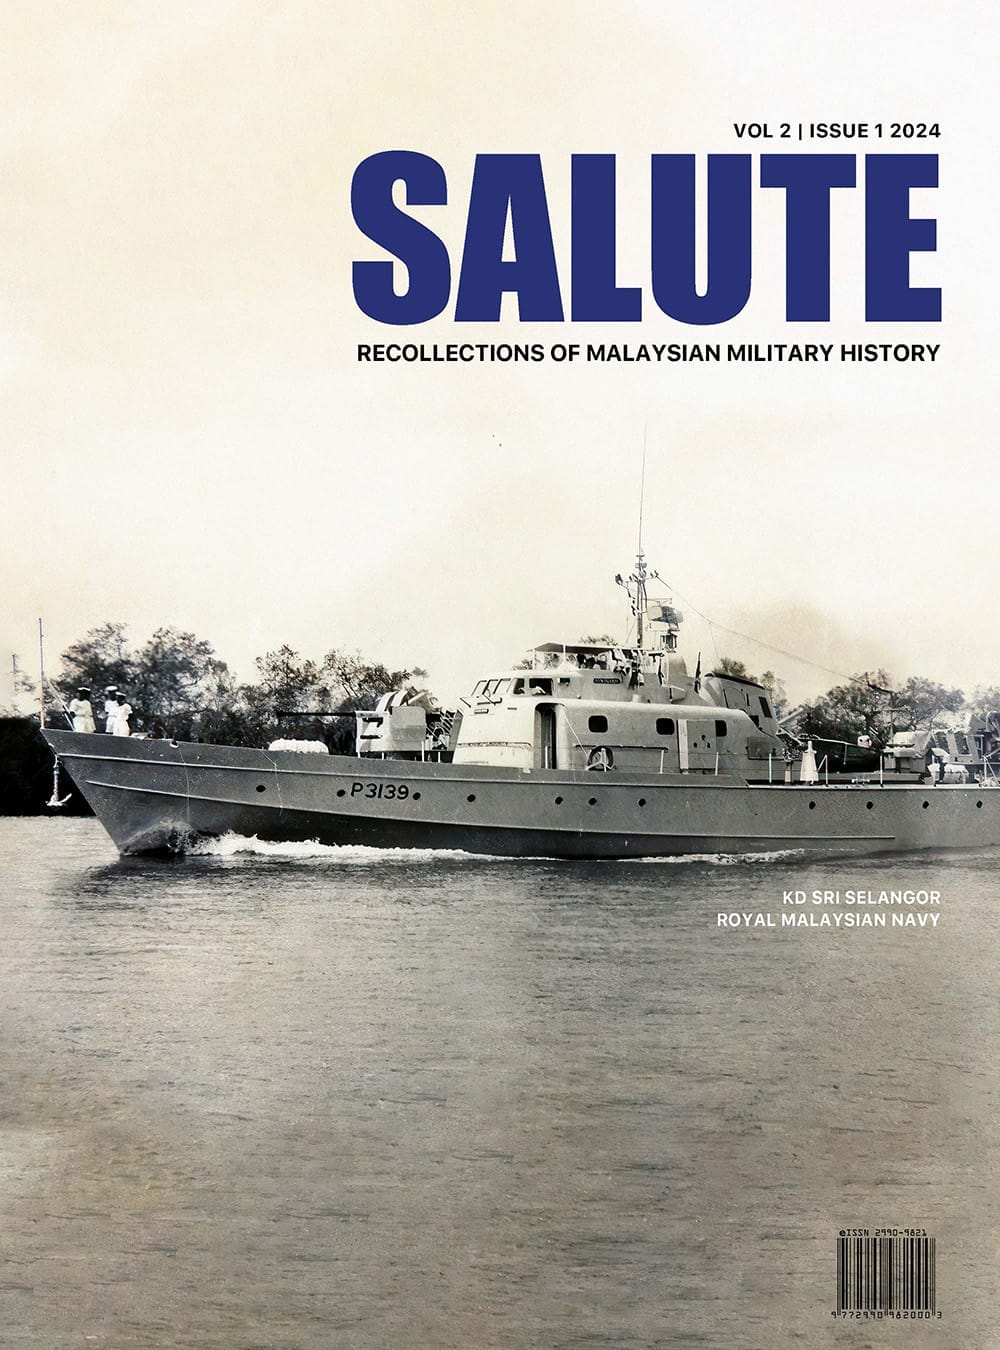 Salute Vol 2 Issue 1 2024 R6_Page_01